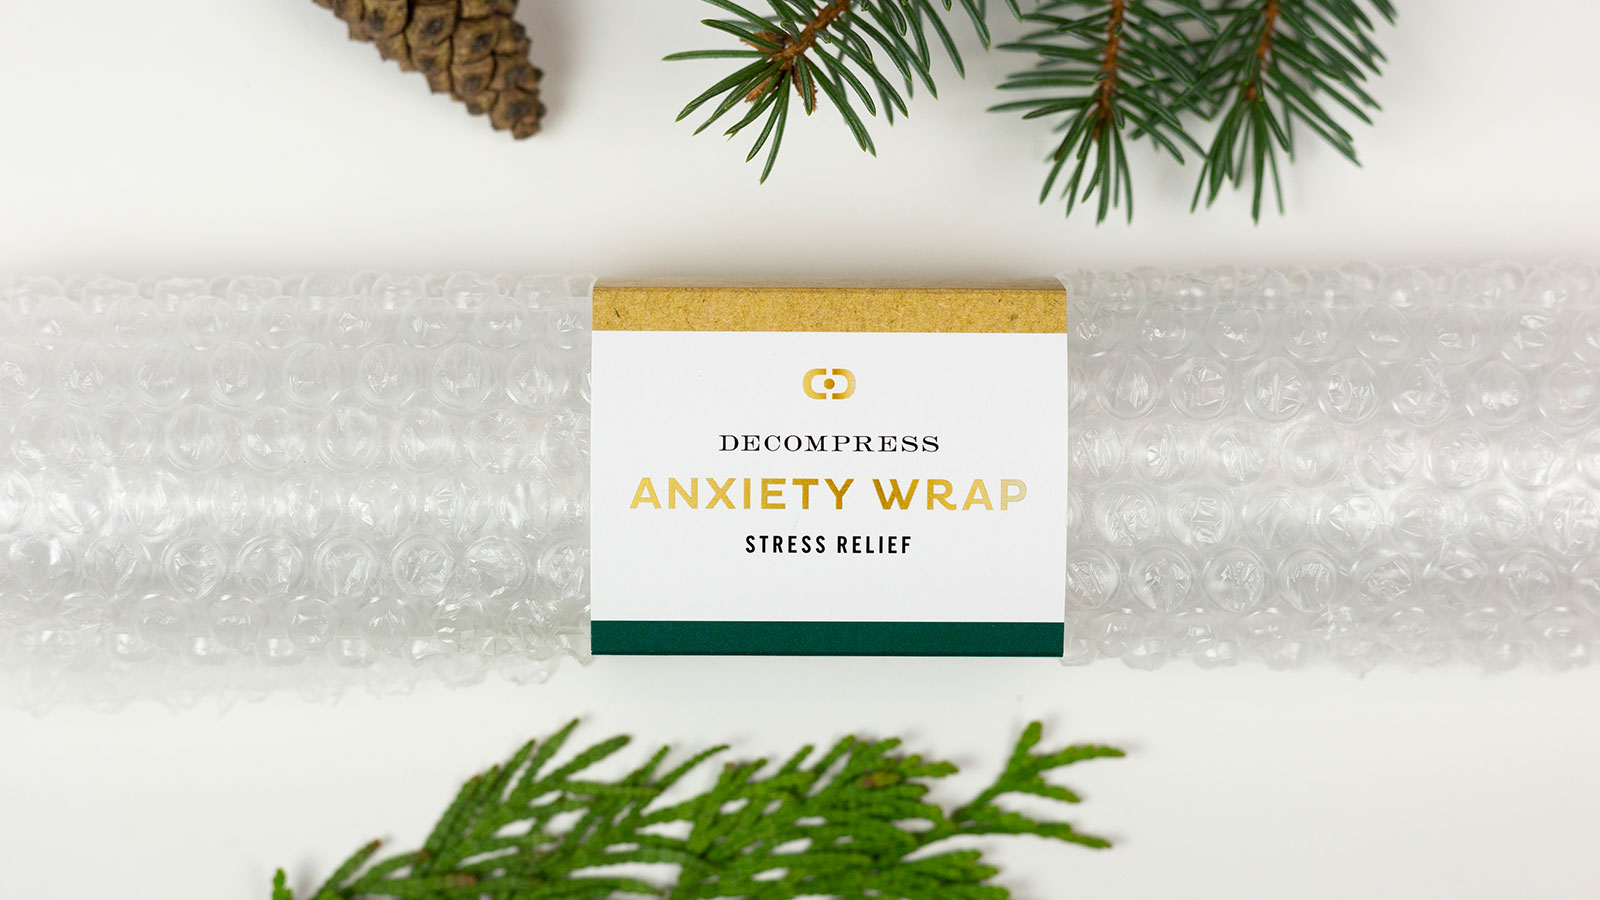 Delin Design Holiday 2018 Stress Kit Direct-Mail Promotion: "Anxiety Wrap" Bubble Wrap